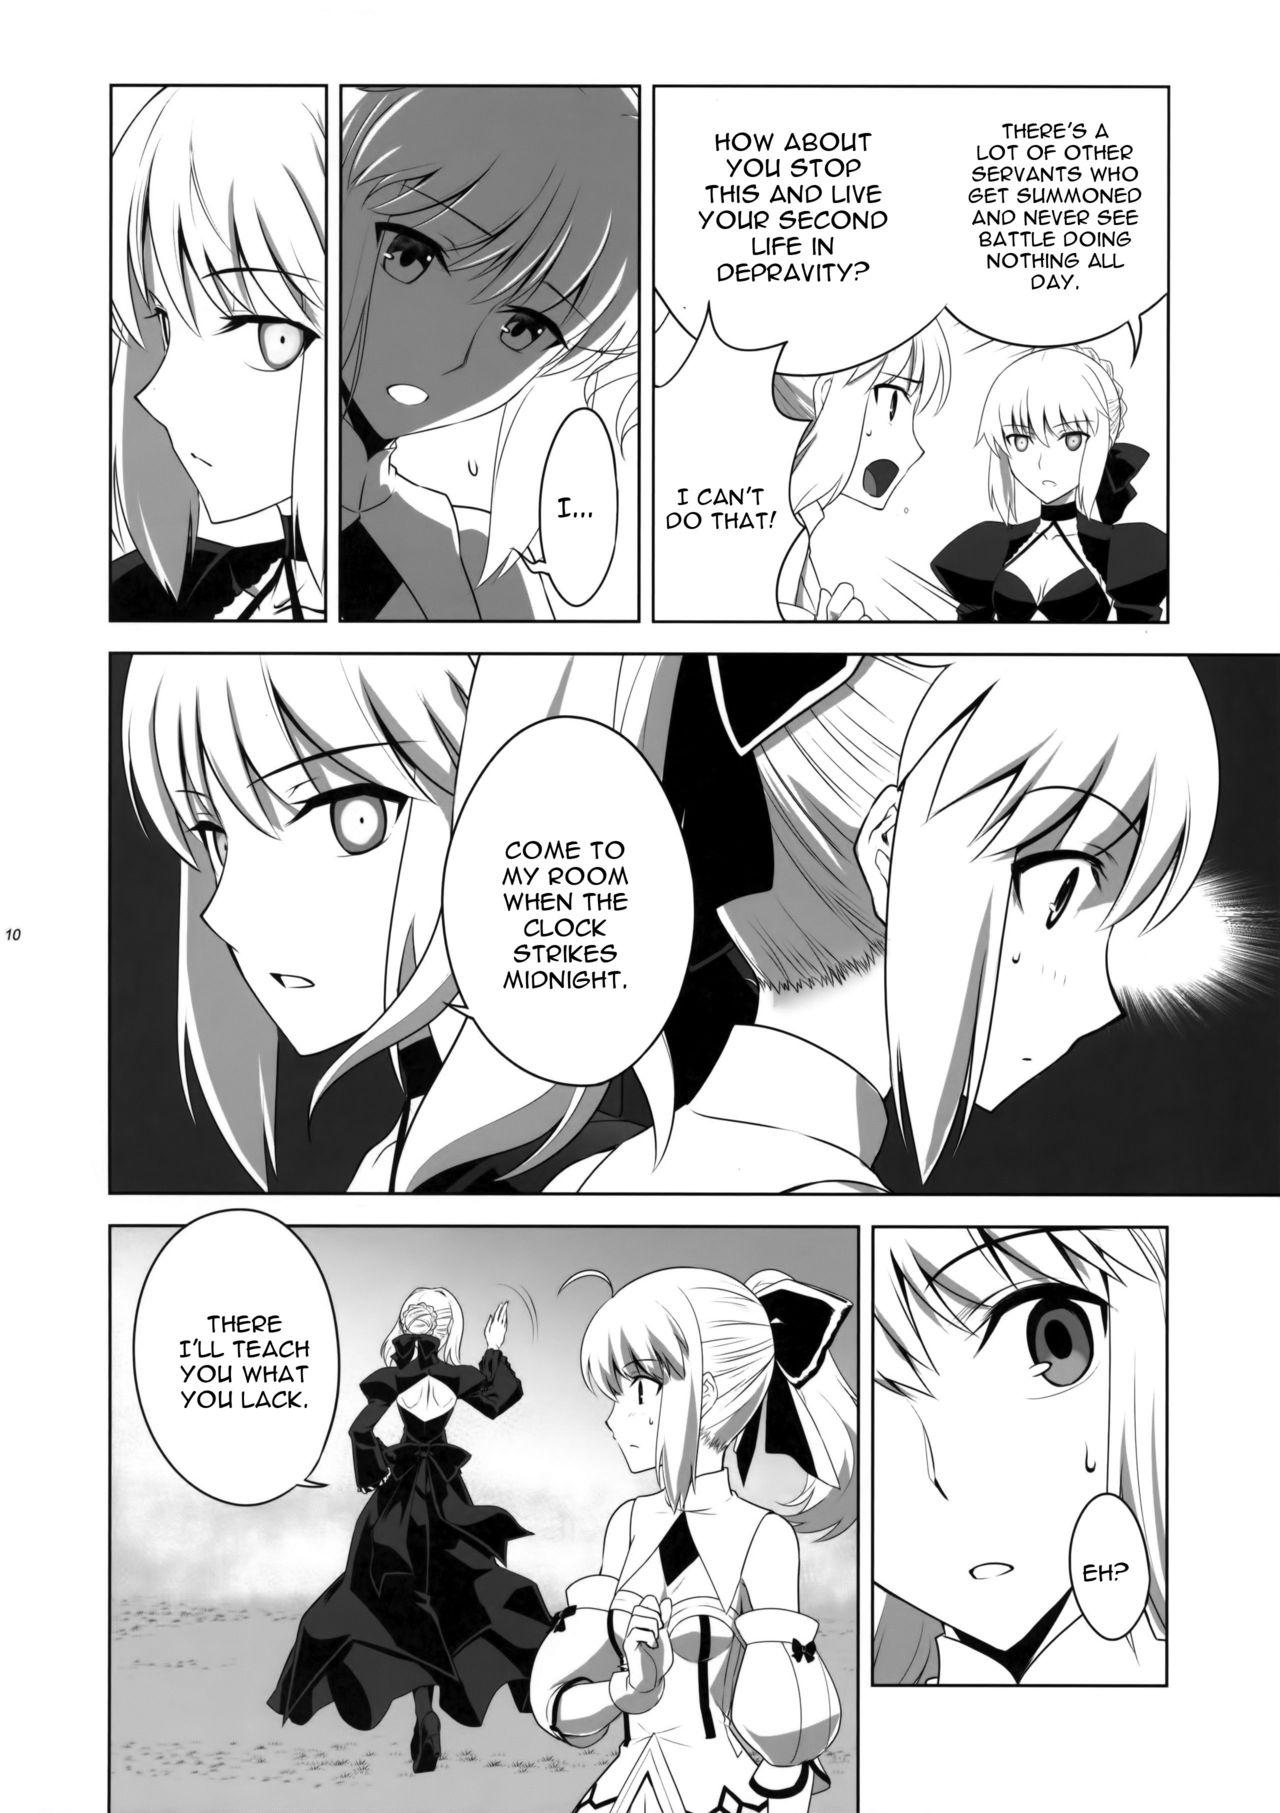 Banging T*MOON COMPLEX GO 05 - Fate grand order Model - Page 9